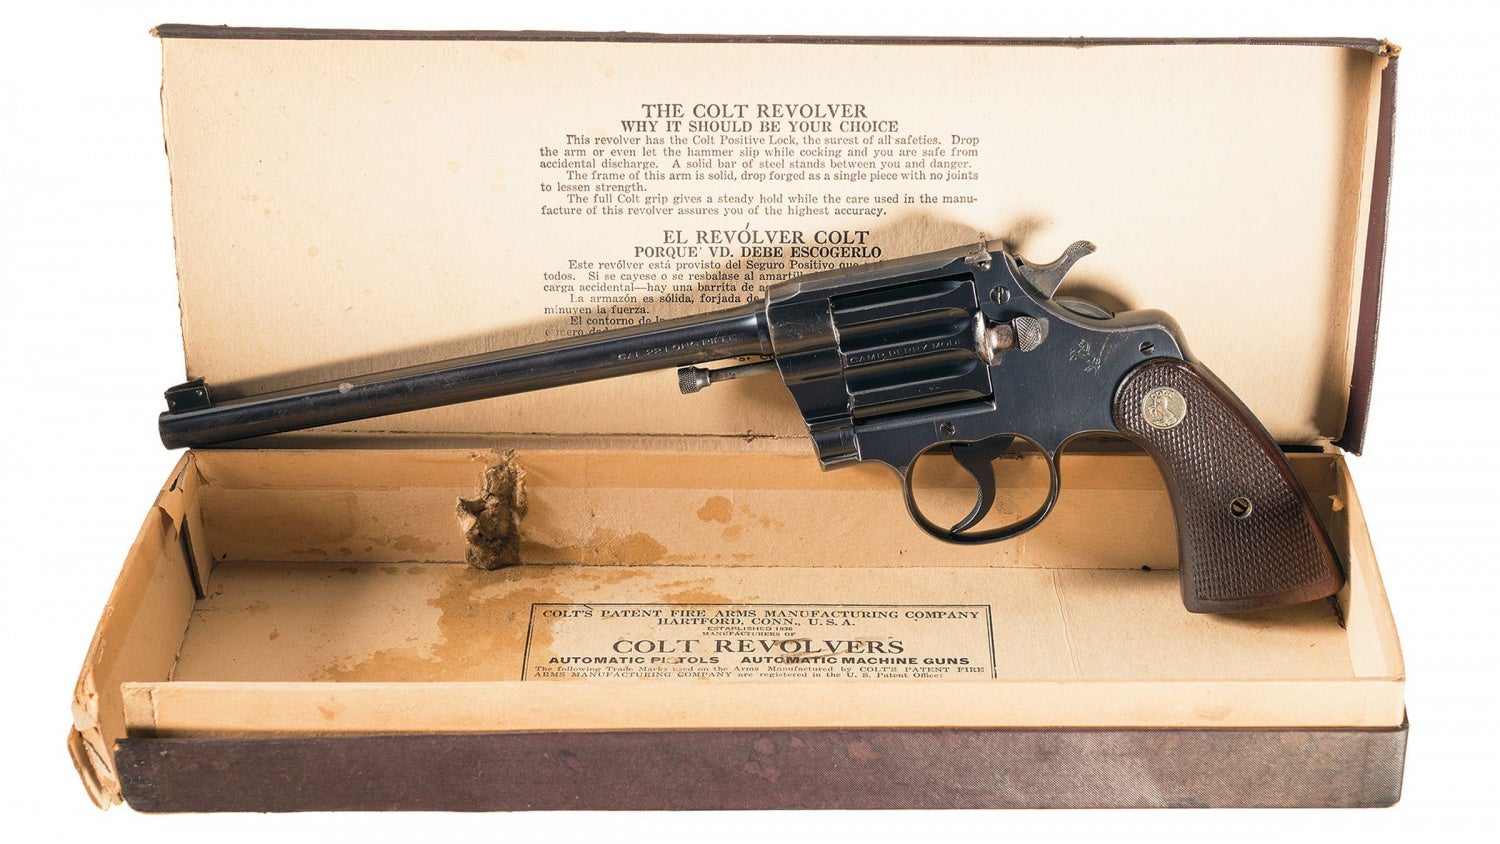 Colt Camp Perry Image Credit: Rock Island Auction